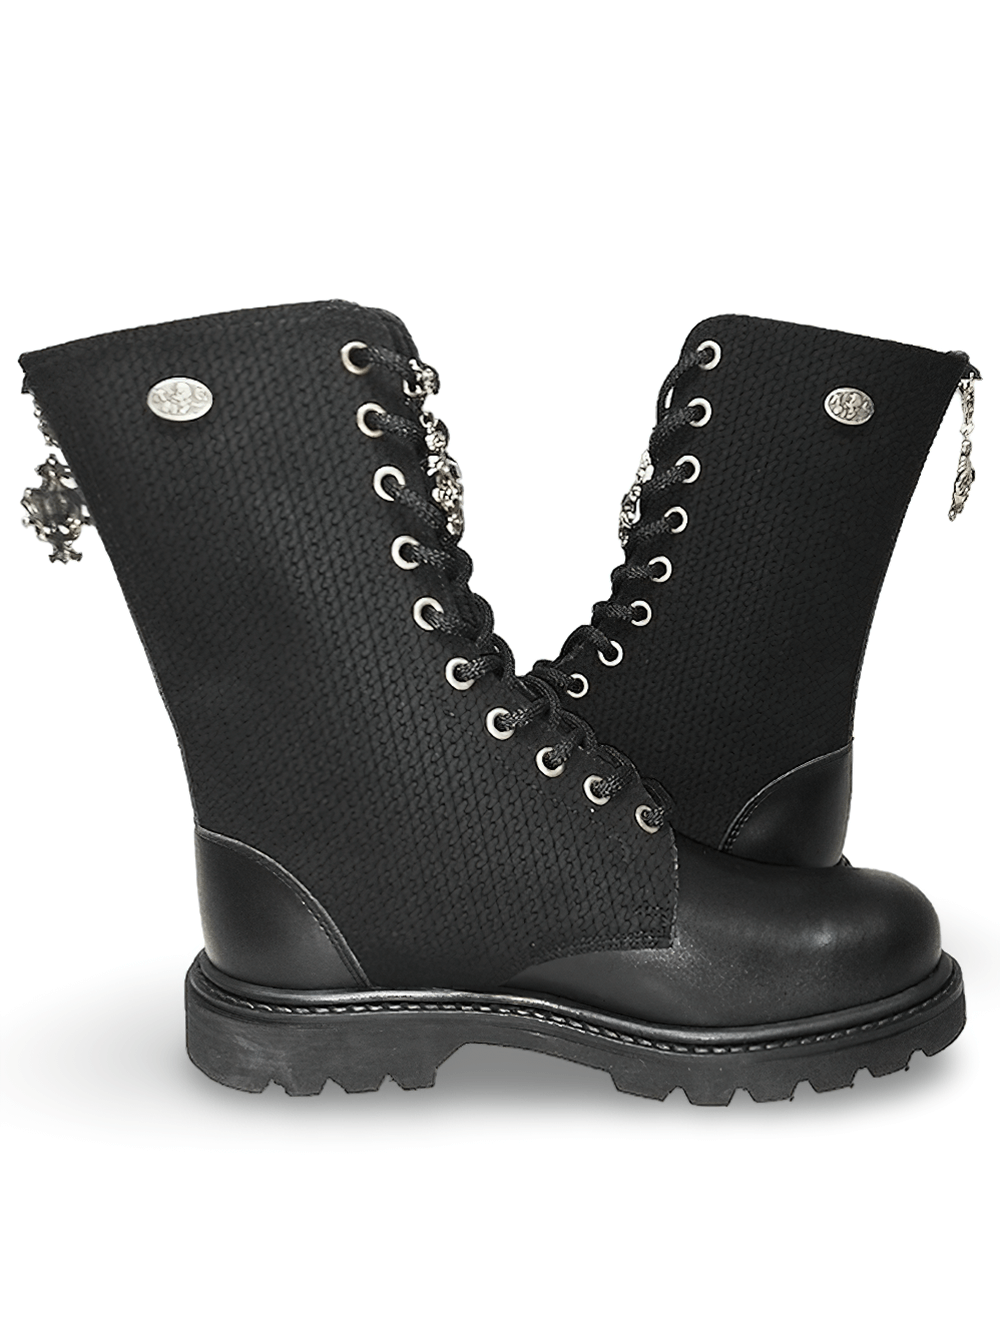 Black 10-Eyelet Ranger Boots with Textile Detail